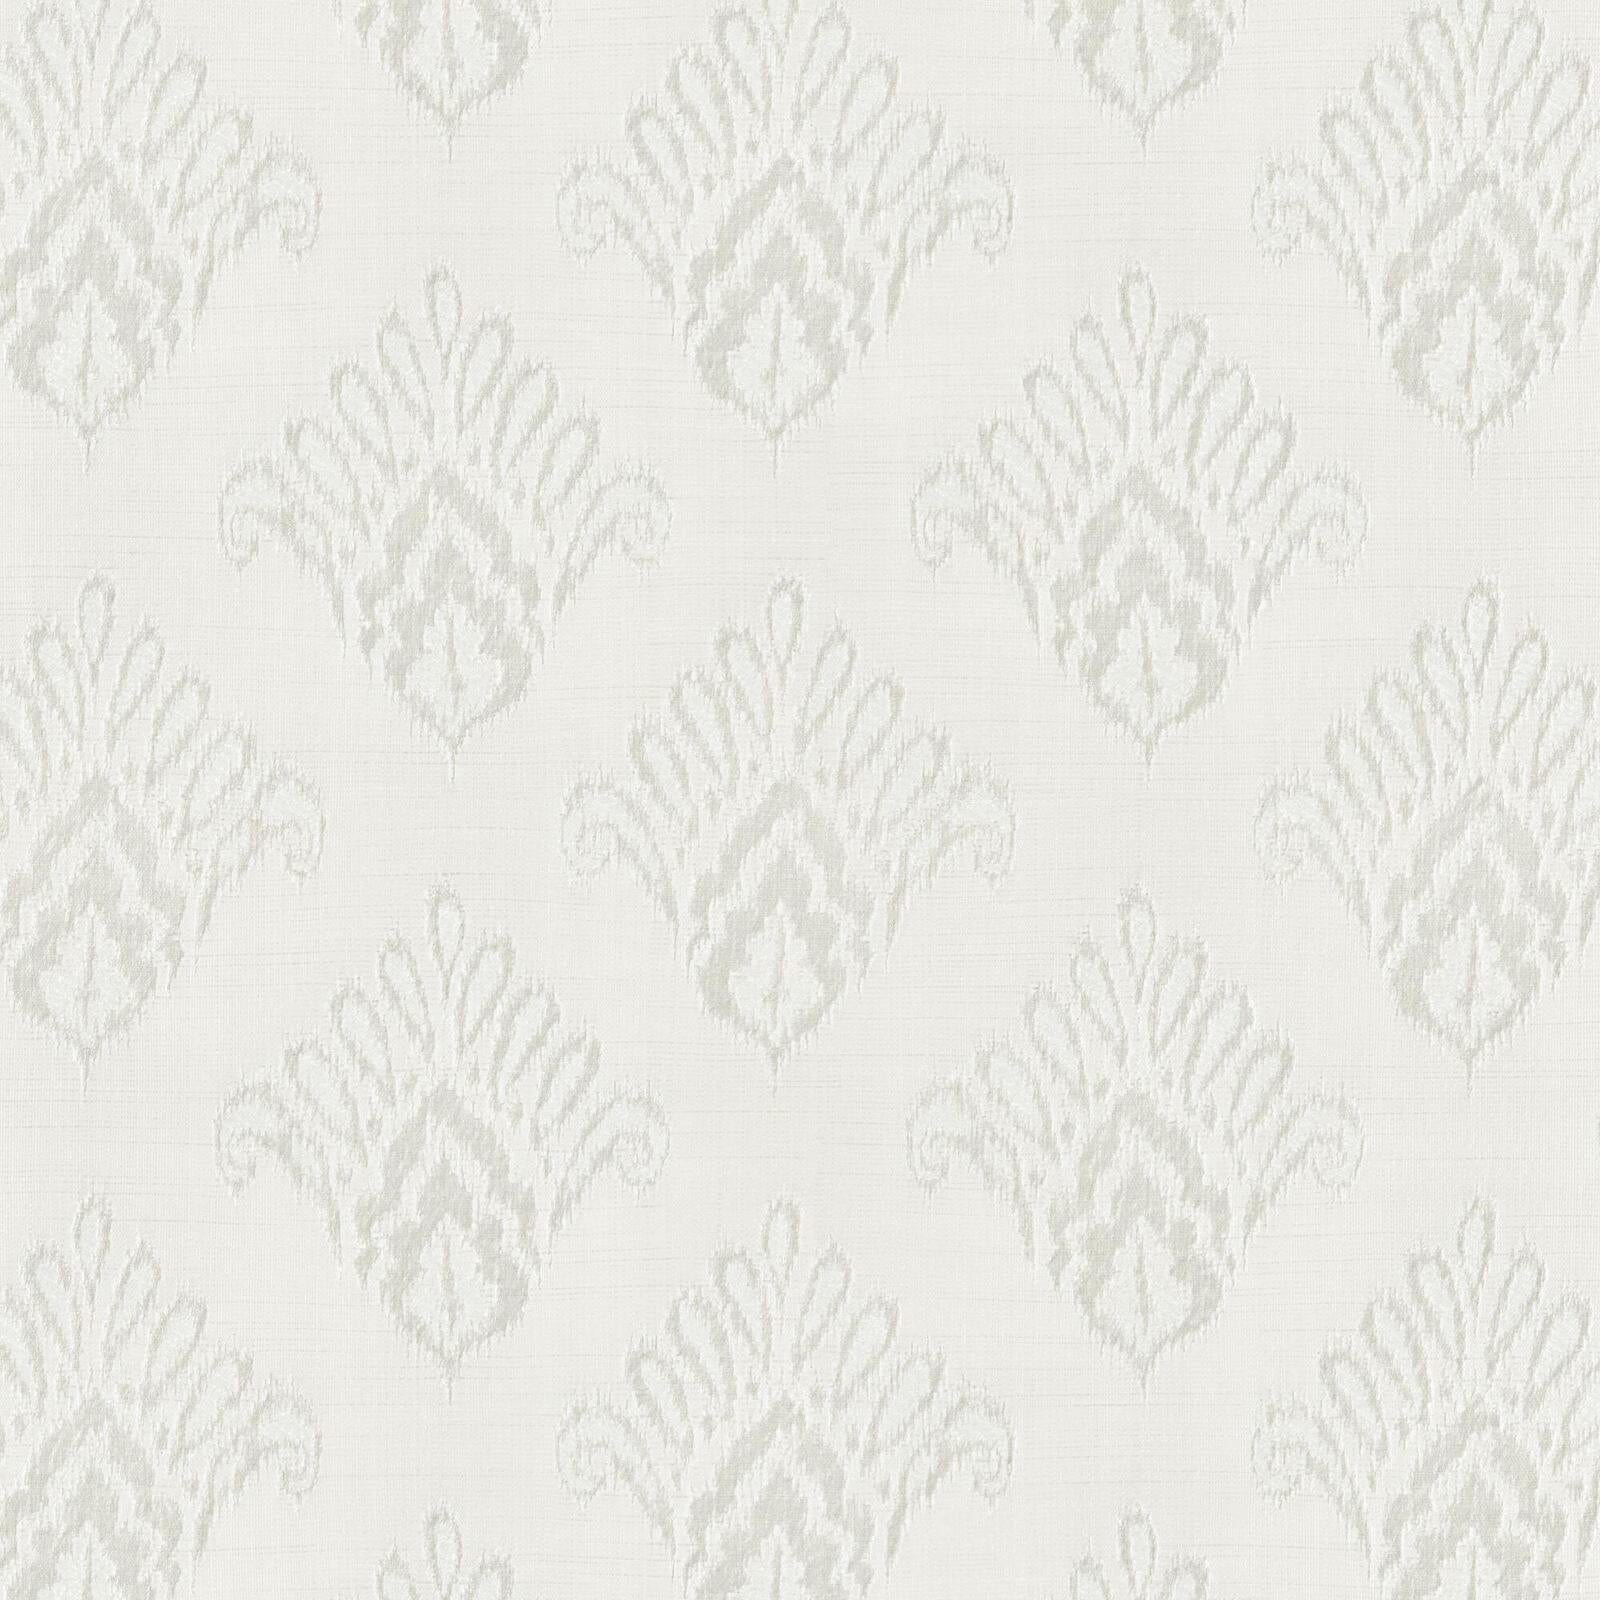 Purchase Maxwell Fabric - Wordsworth, # 910 Feather